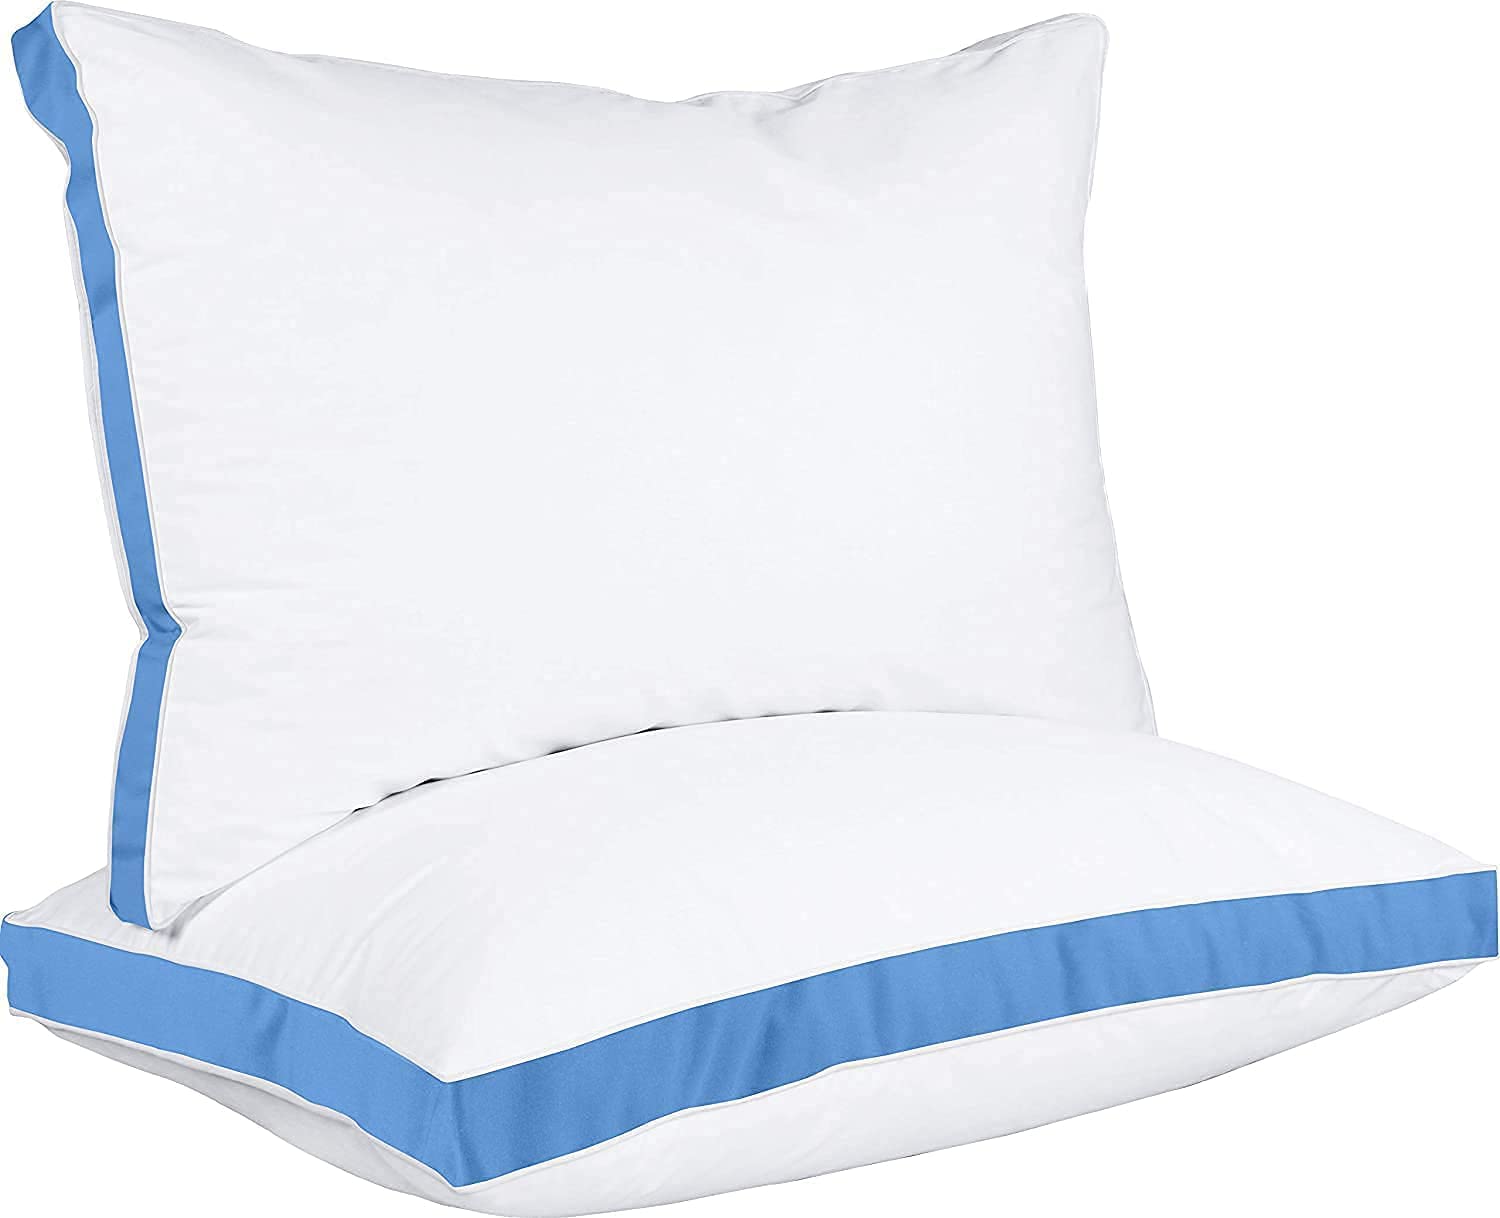 Utopia Bedding Gusseted Pillow